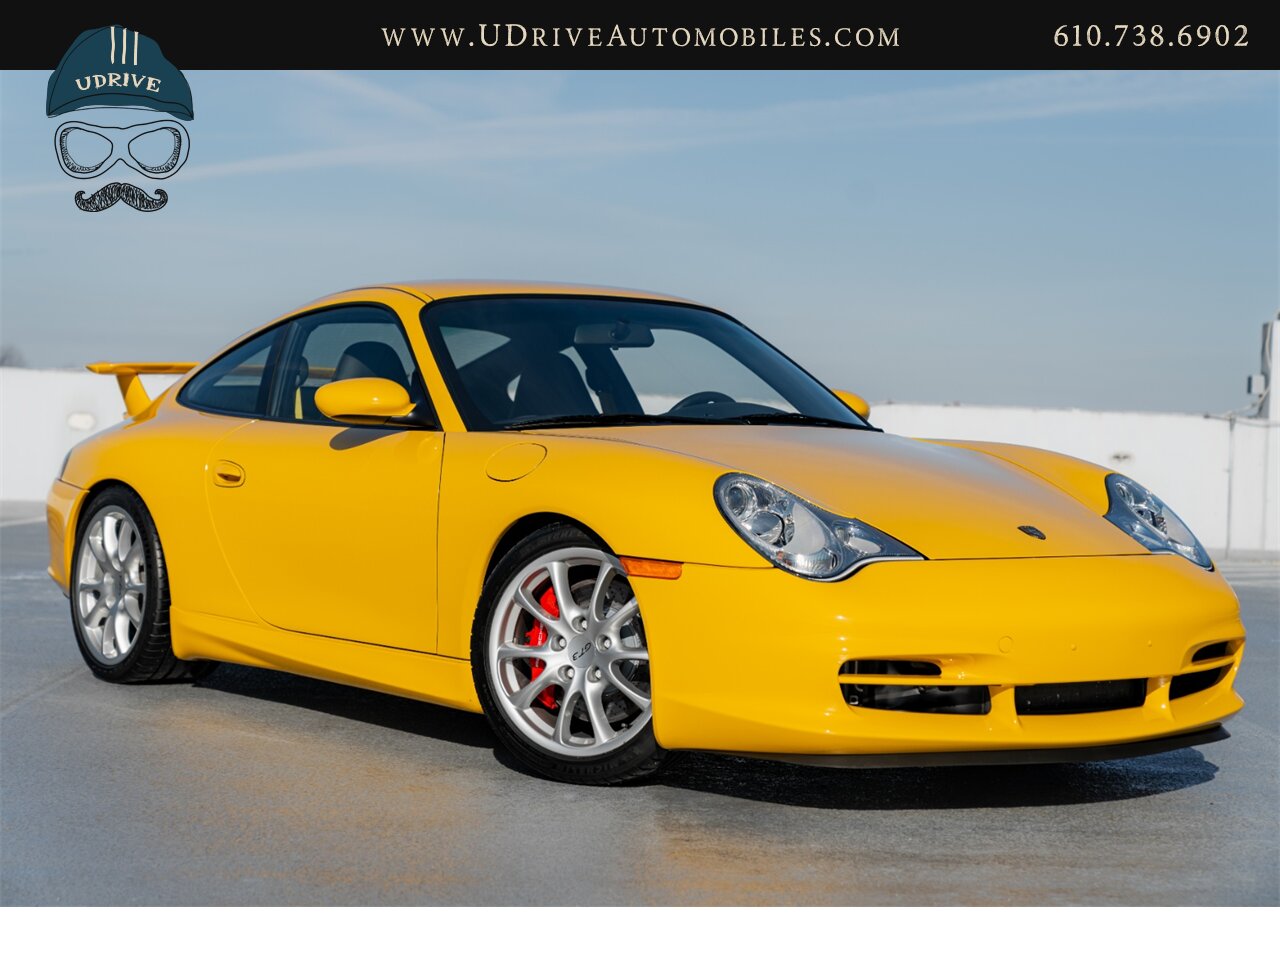 2005 Porsche 911 GT3 996 Speed Yellow Sport Seats Pntd Hardbacks  Pntd Console Deviating Stitch Yellow Accents Throughout - Photo 4 - West Chester, PA 19382